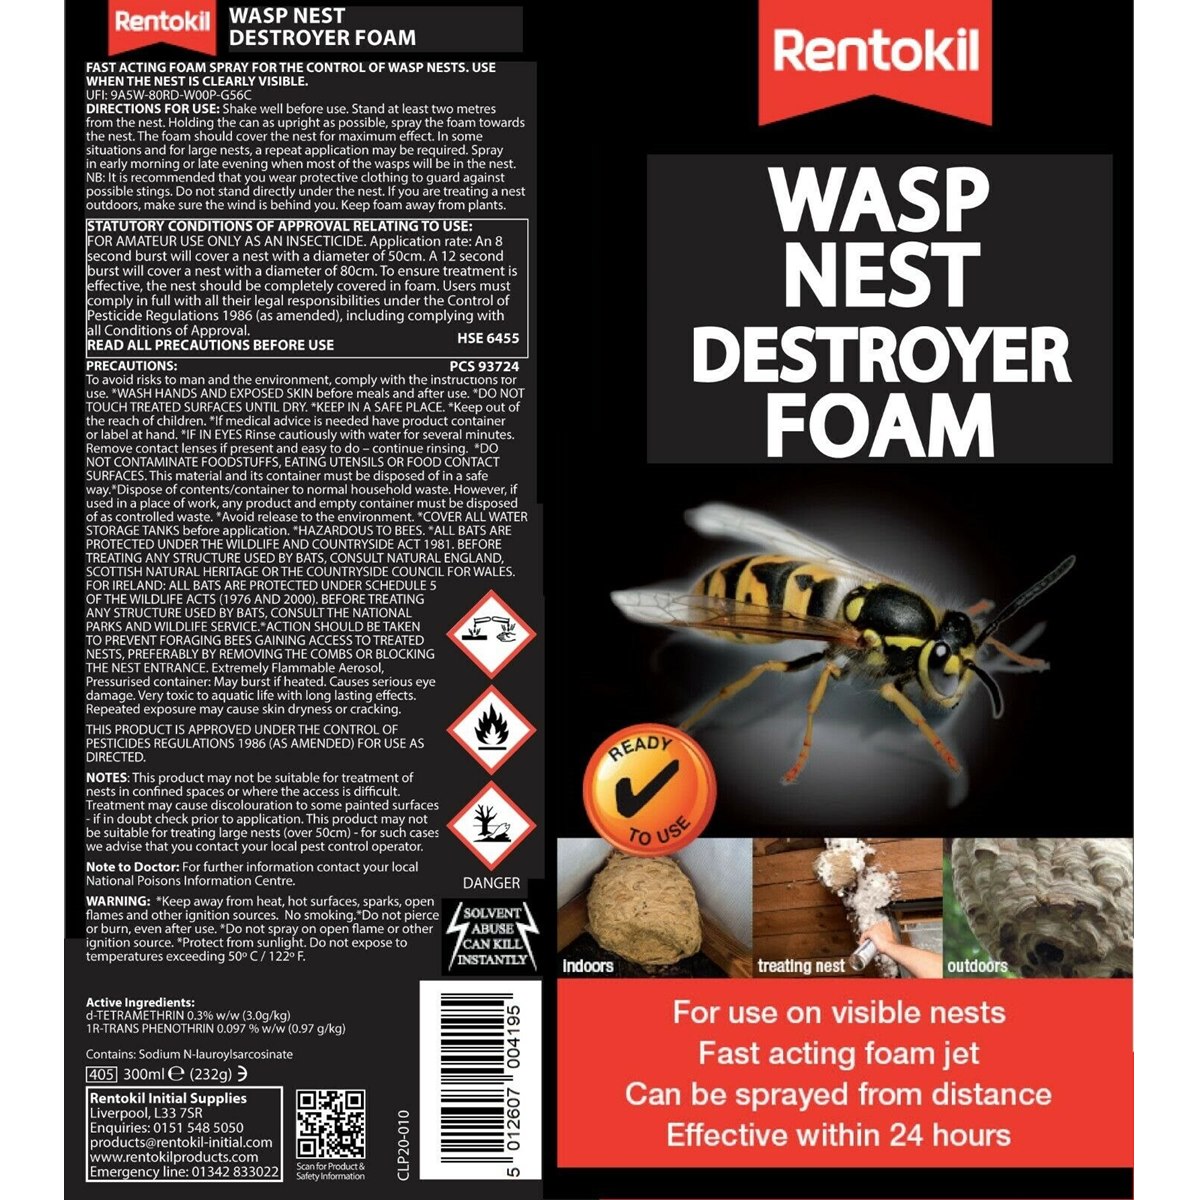 How to deal with Wasps Nests